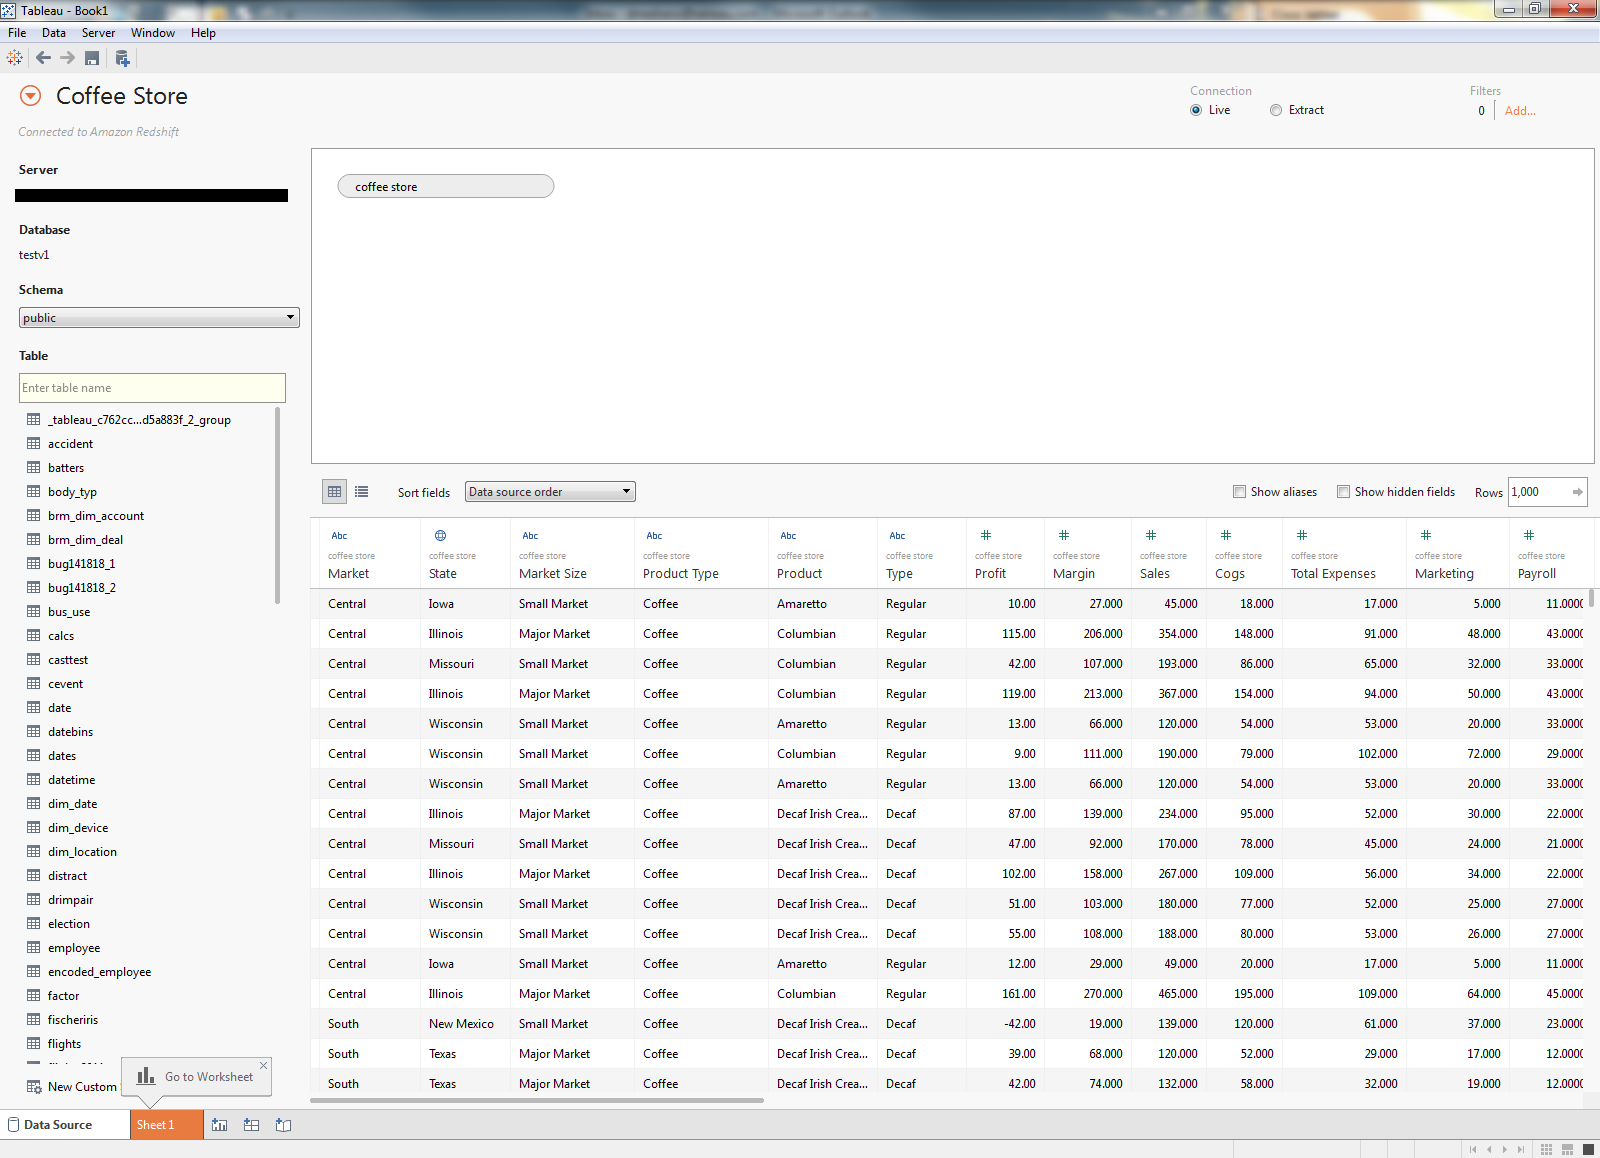 Picture of Tableau Online tools.